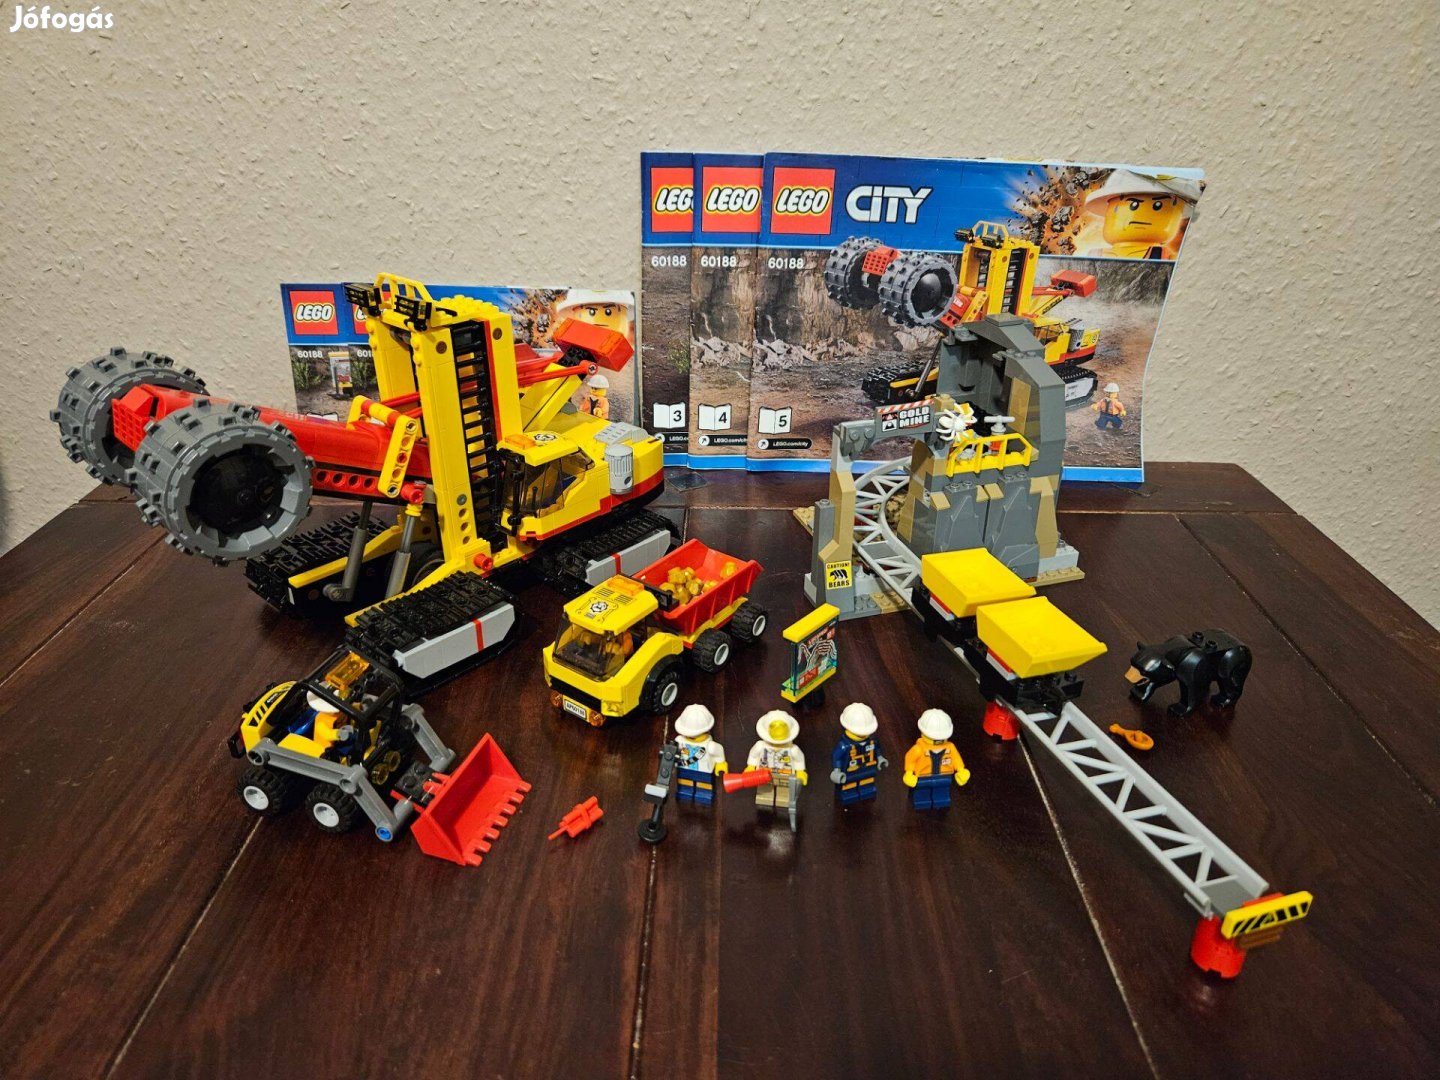 LEGO City - 60188 - Mining Experts Site